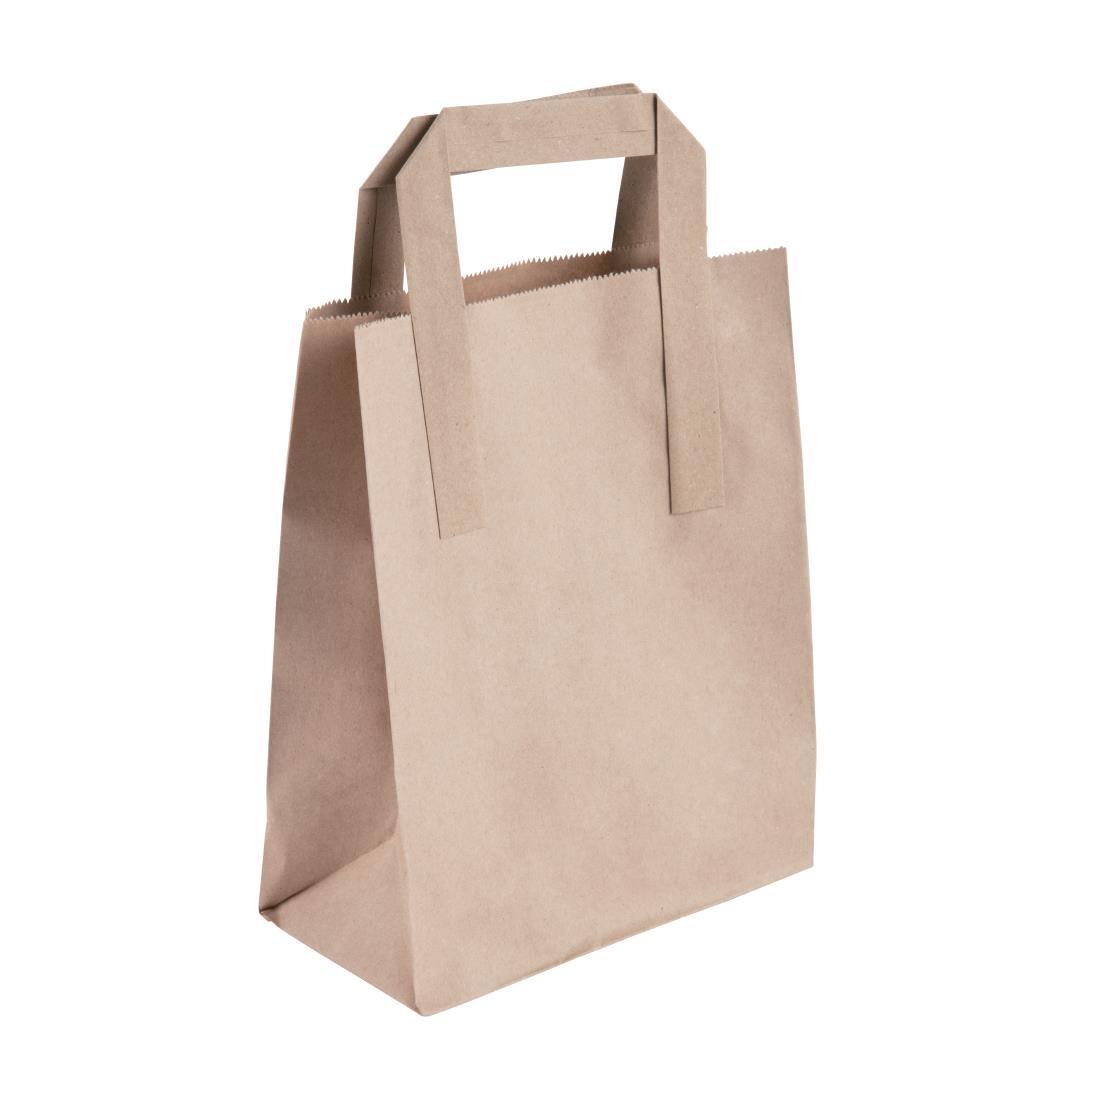 Fiesta Compostable Recycled Brown Paper Carrier Bags Small (Pack of 250) - CS351  - 3